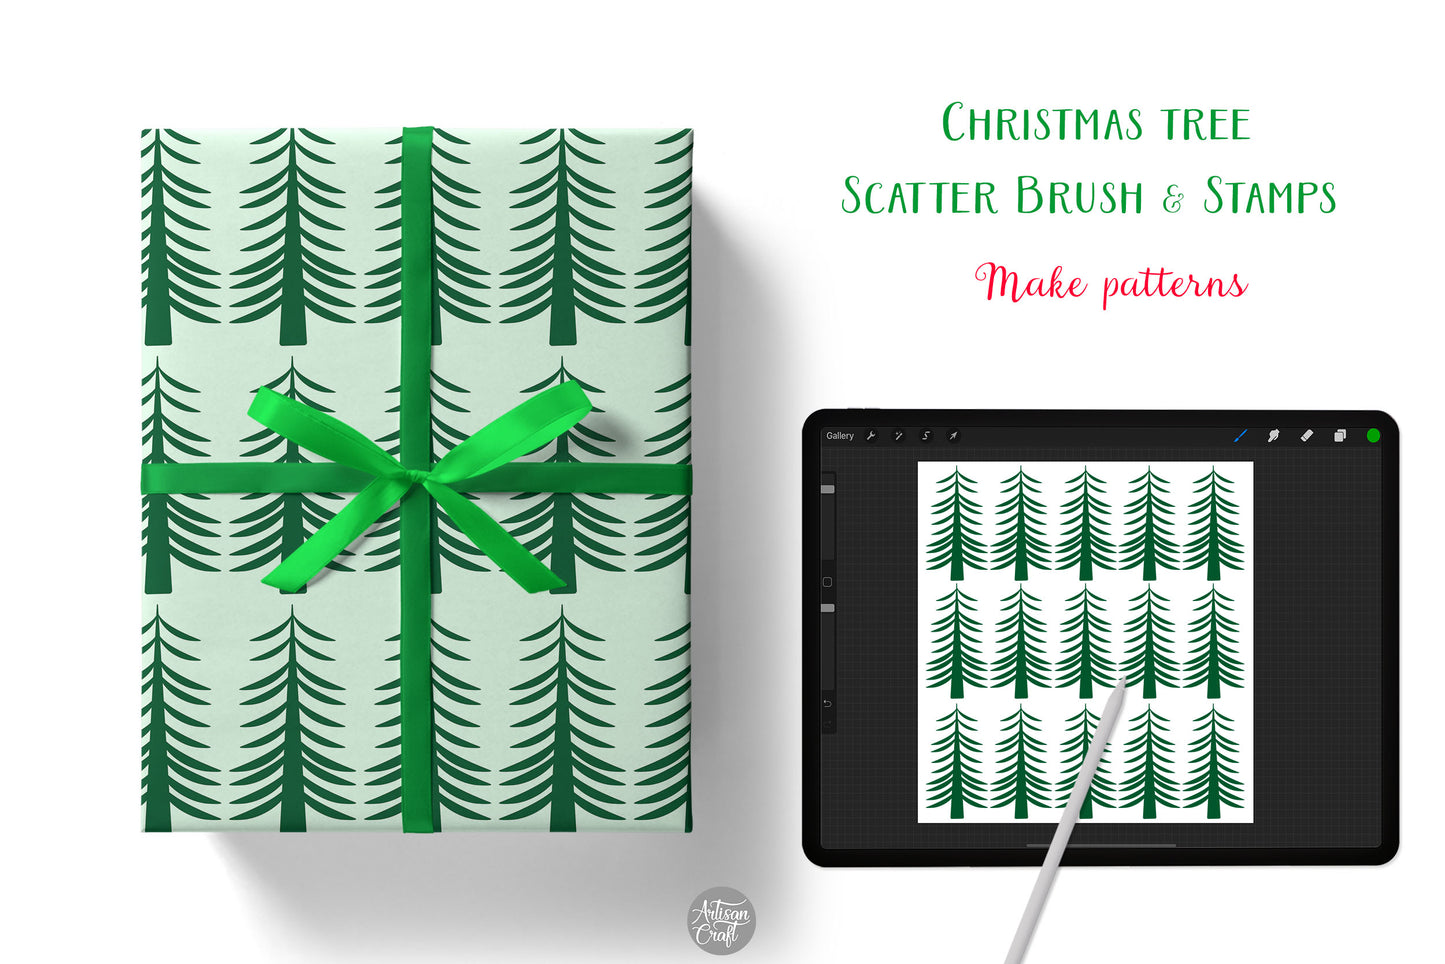 Procreate brushes for Christmas trees